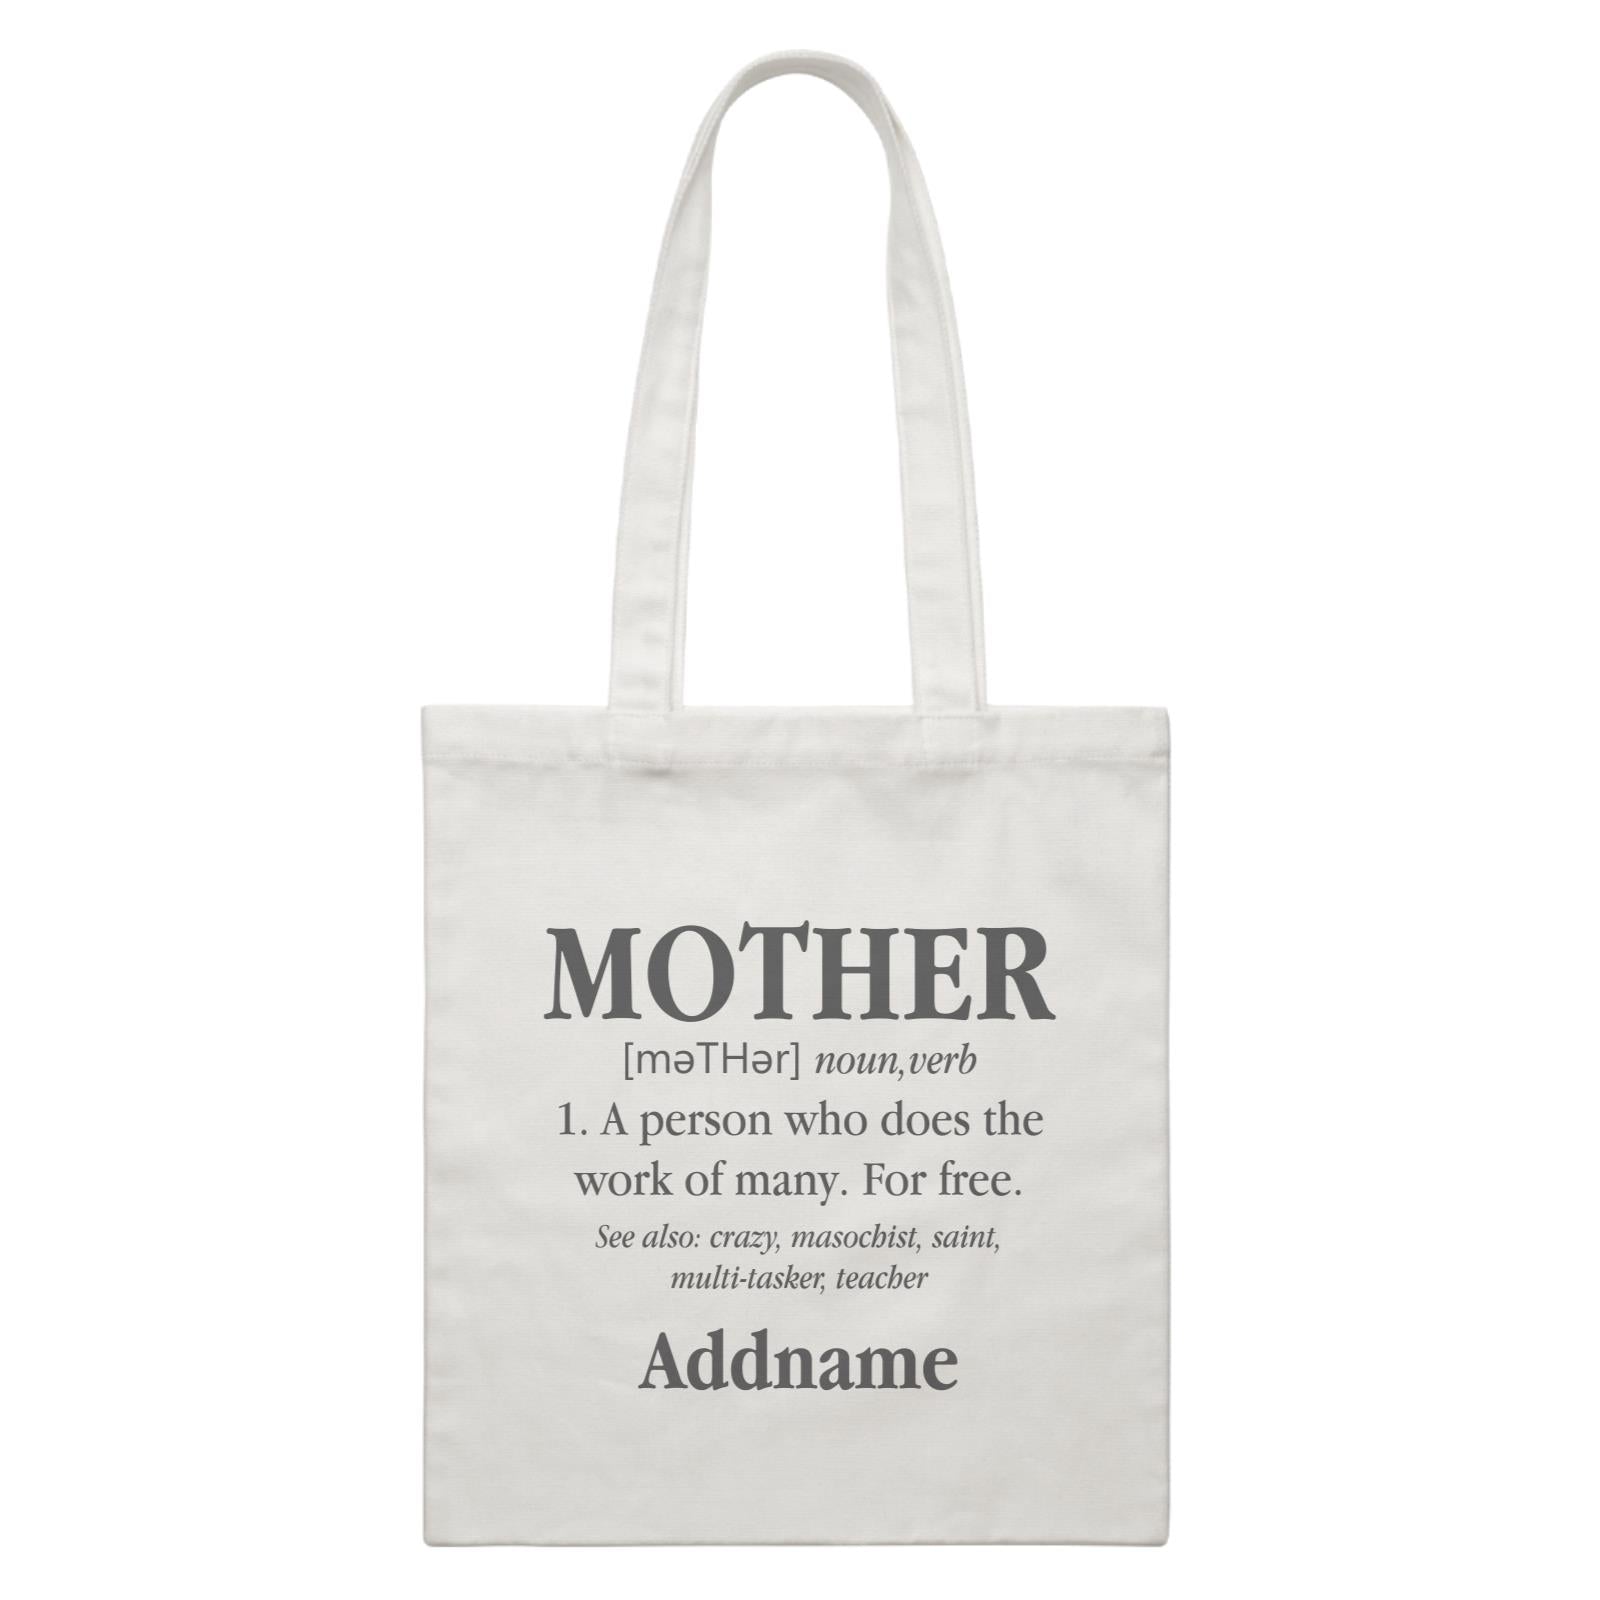 Funny Mom Quotes Mother Meaning A Person Who Does The Work Of Many For Free Addname White Canvas Bag